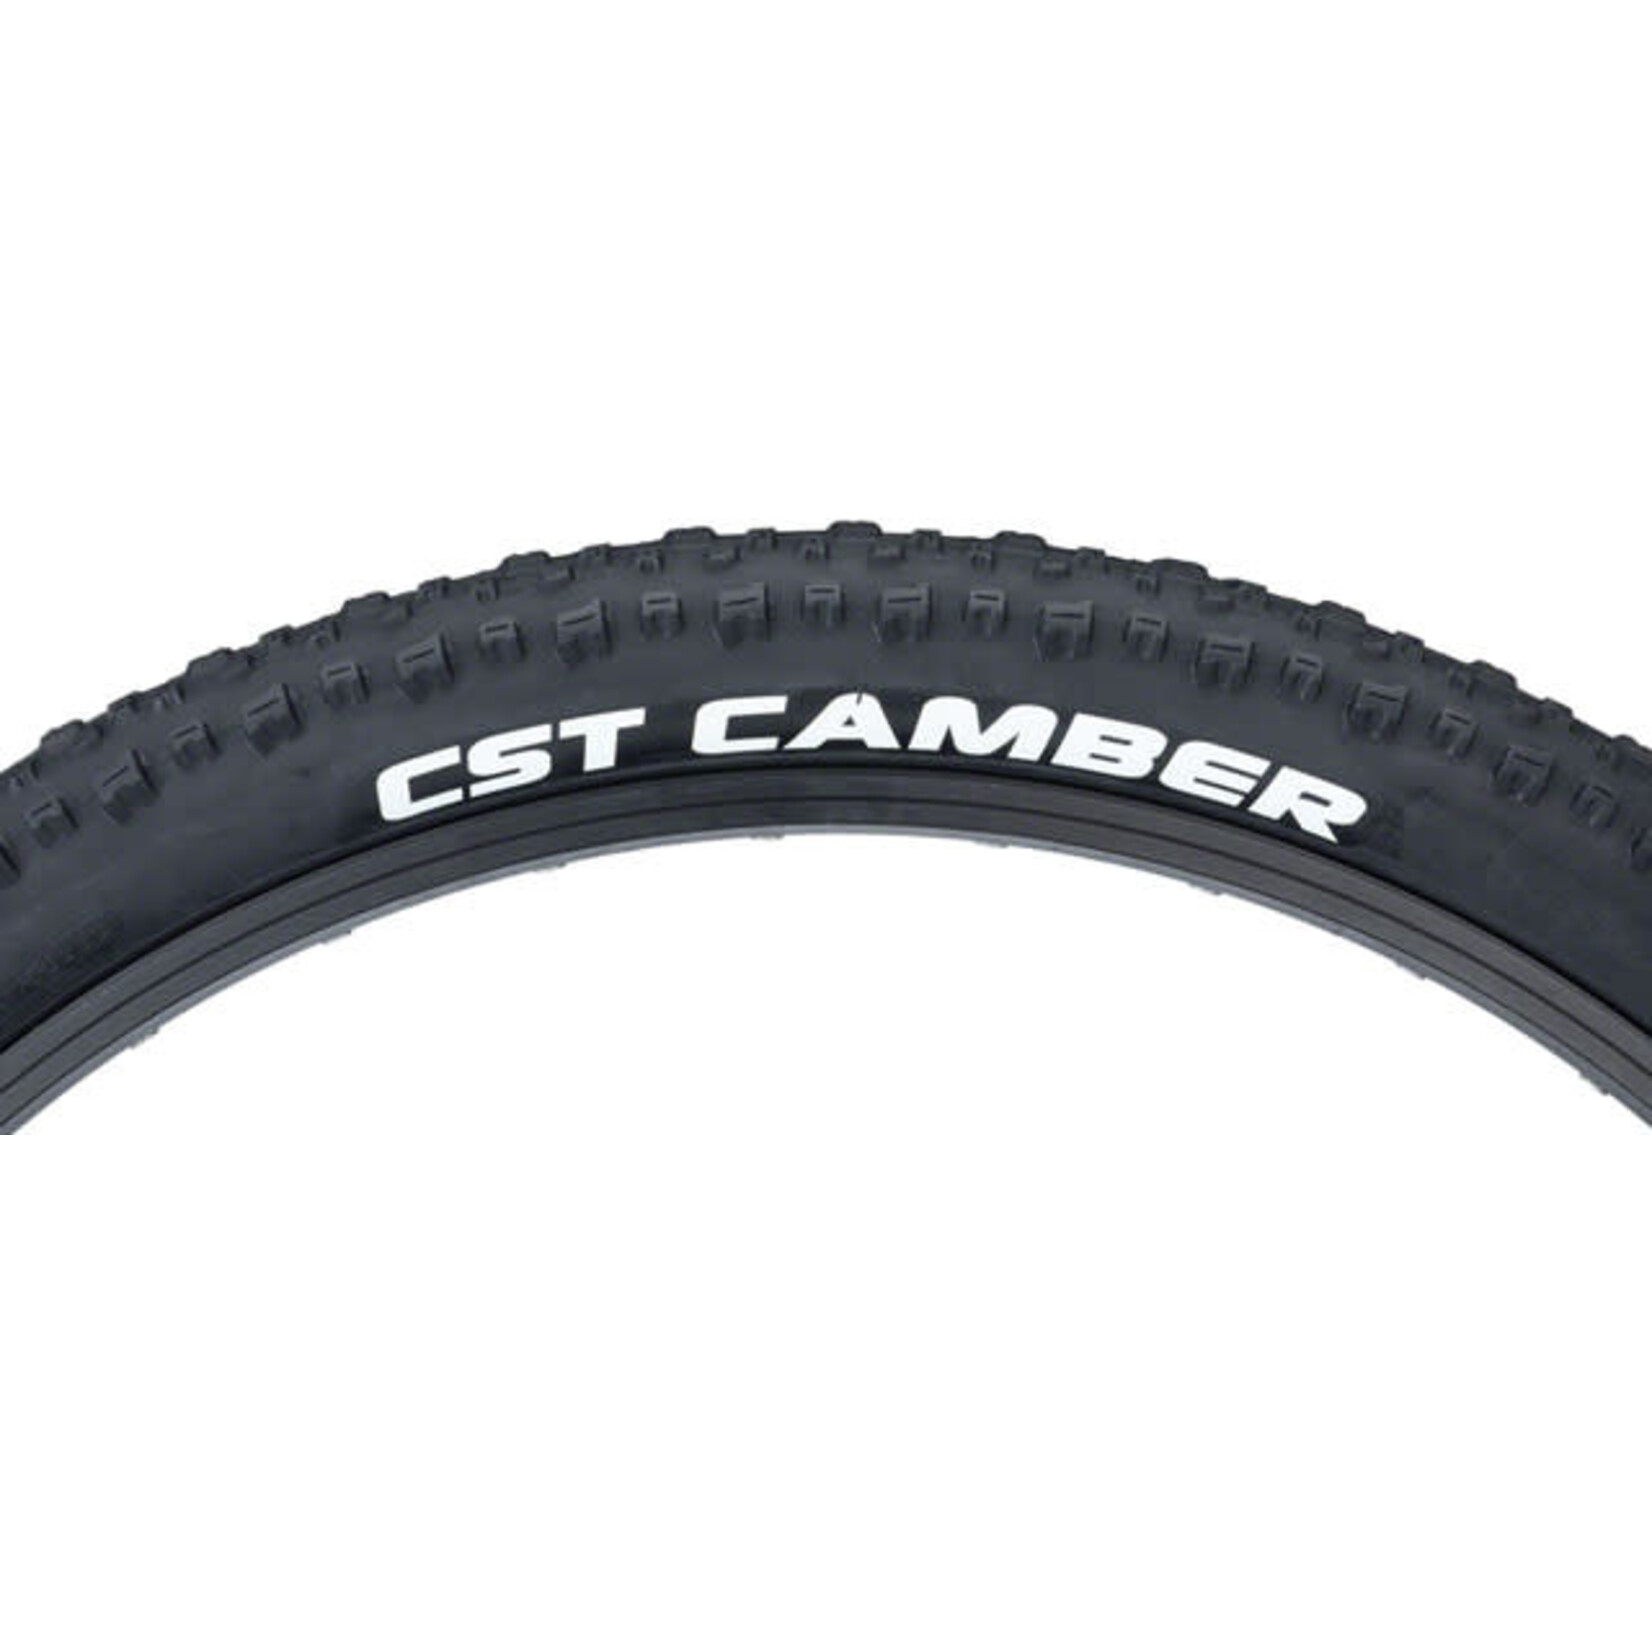 CST Camber Tire - 26 x 2.25, Clincher, Wire, Black